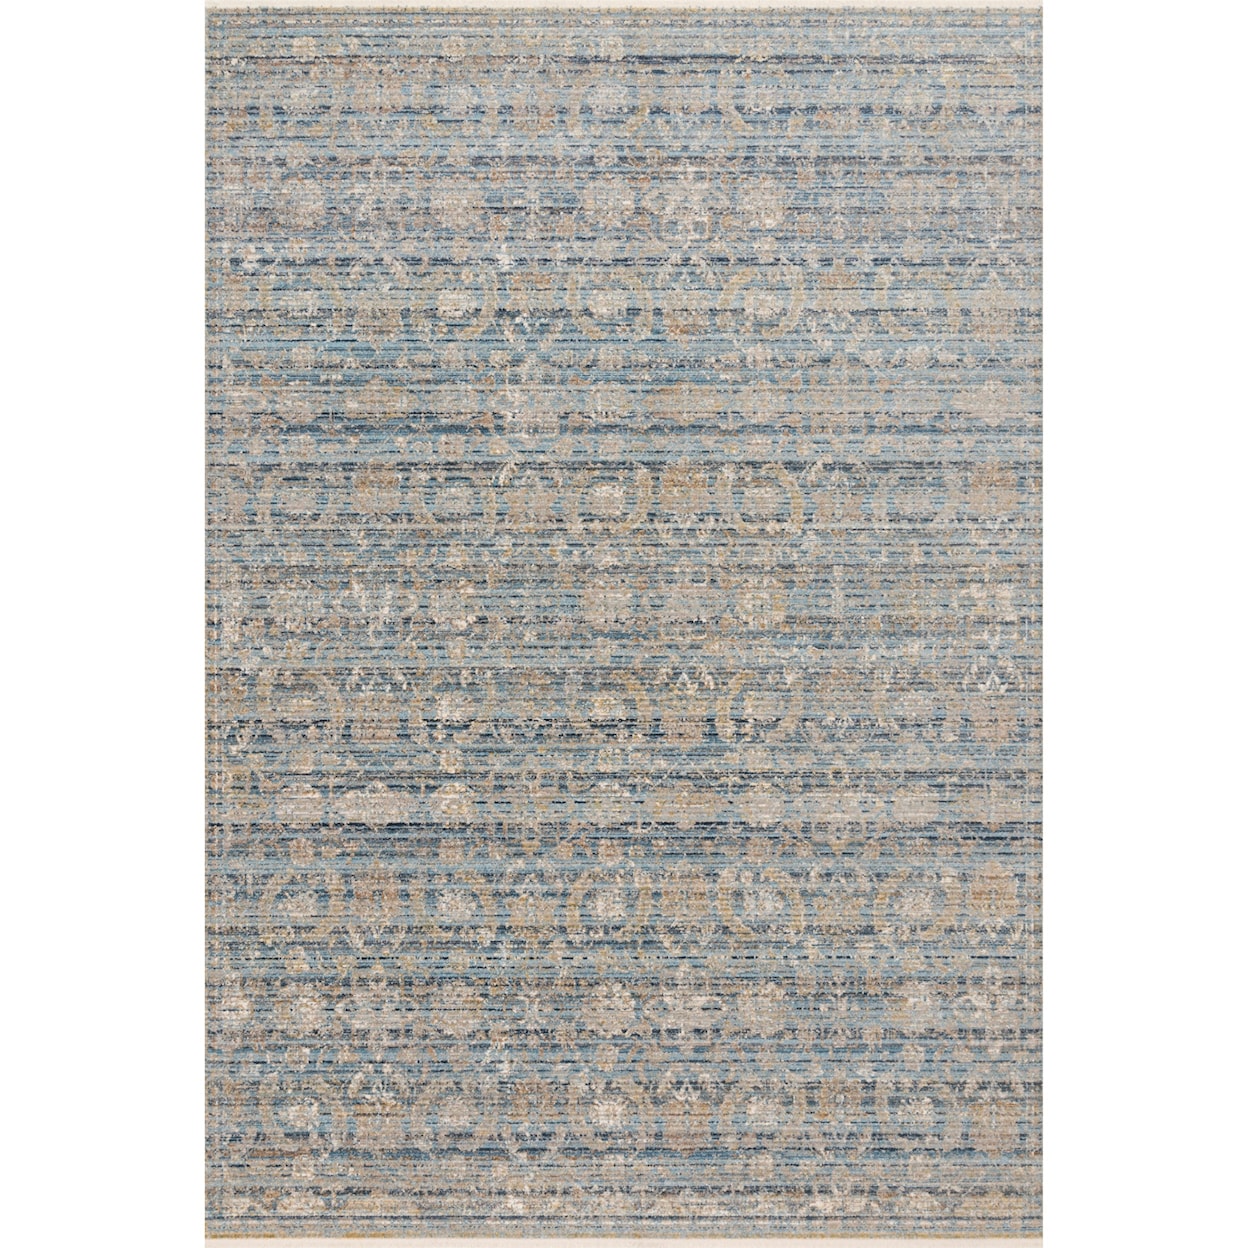 Reeds Rugs Claire 2'7" x 9'6" Ocean / Gold Rug